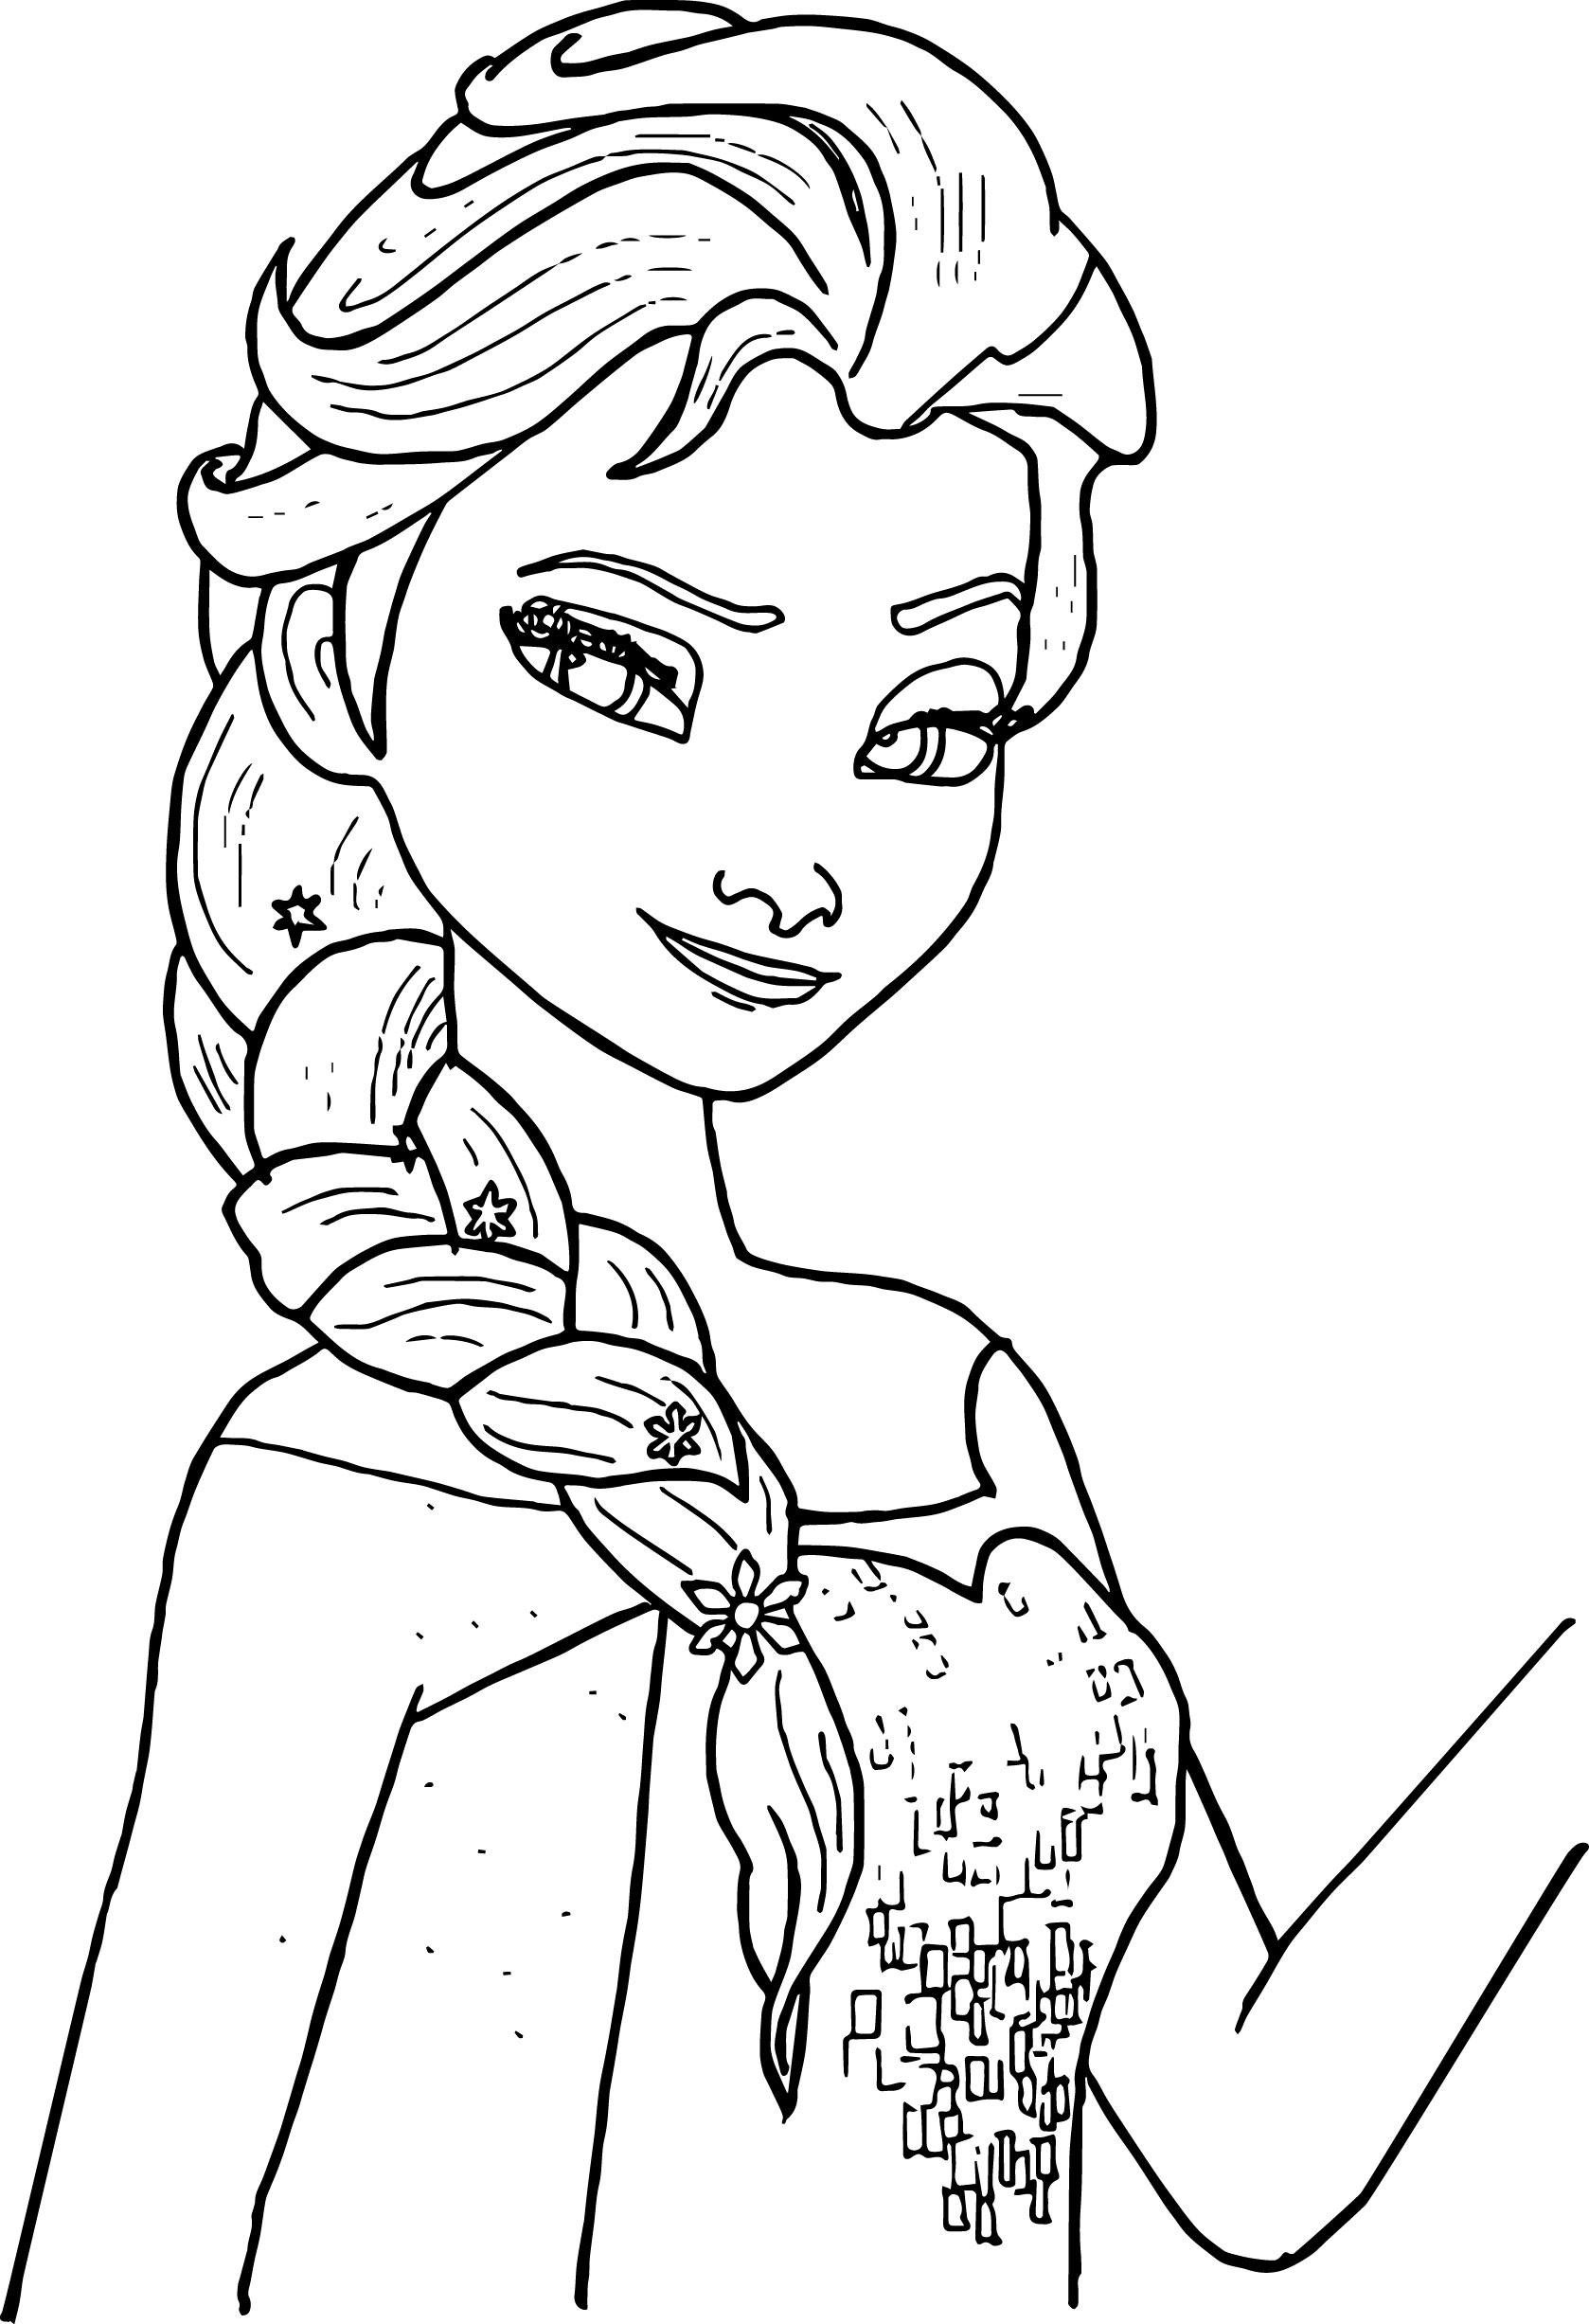 Free Printable Elsa Coloring Pages For Kids Best Coloring Pages For Kids